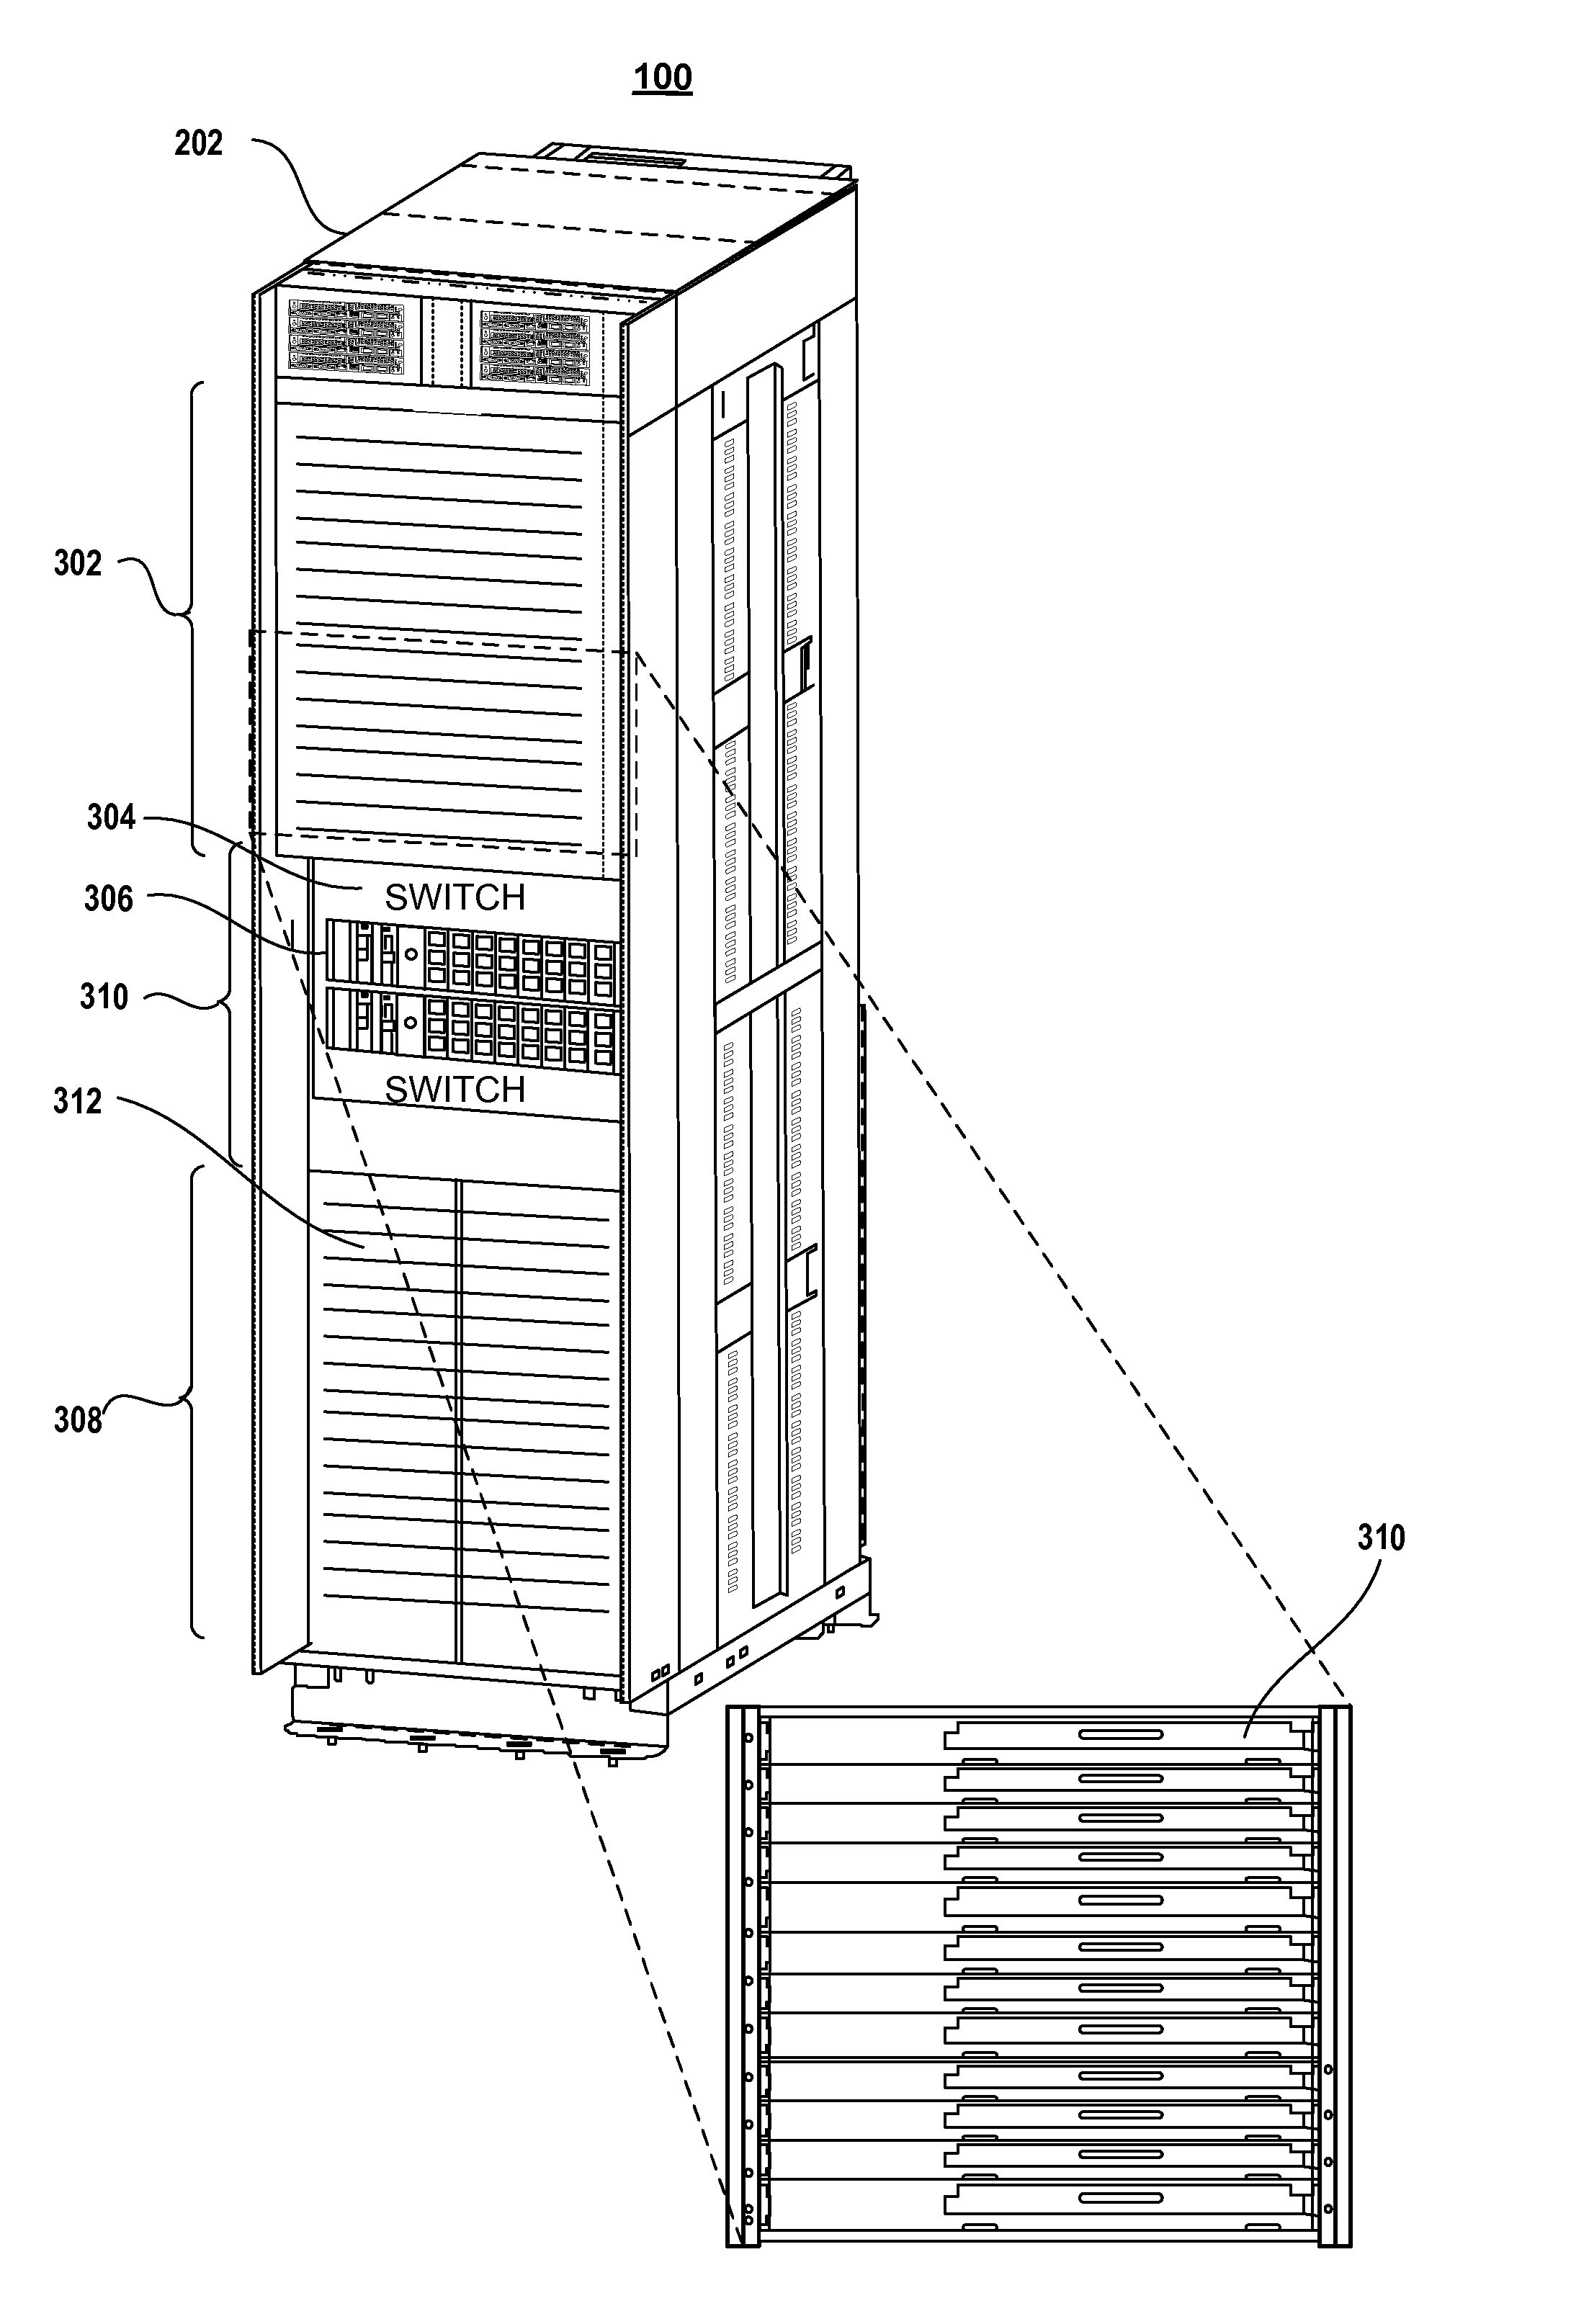 Modular application of peripheral panels as expansion sleeves and cable management components within a rack-based information handling system